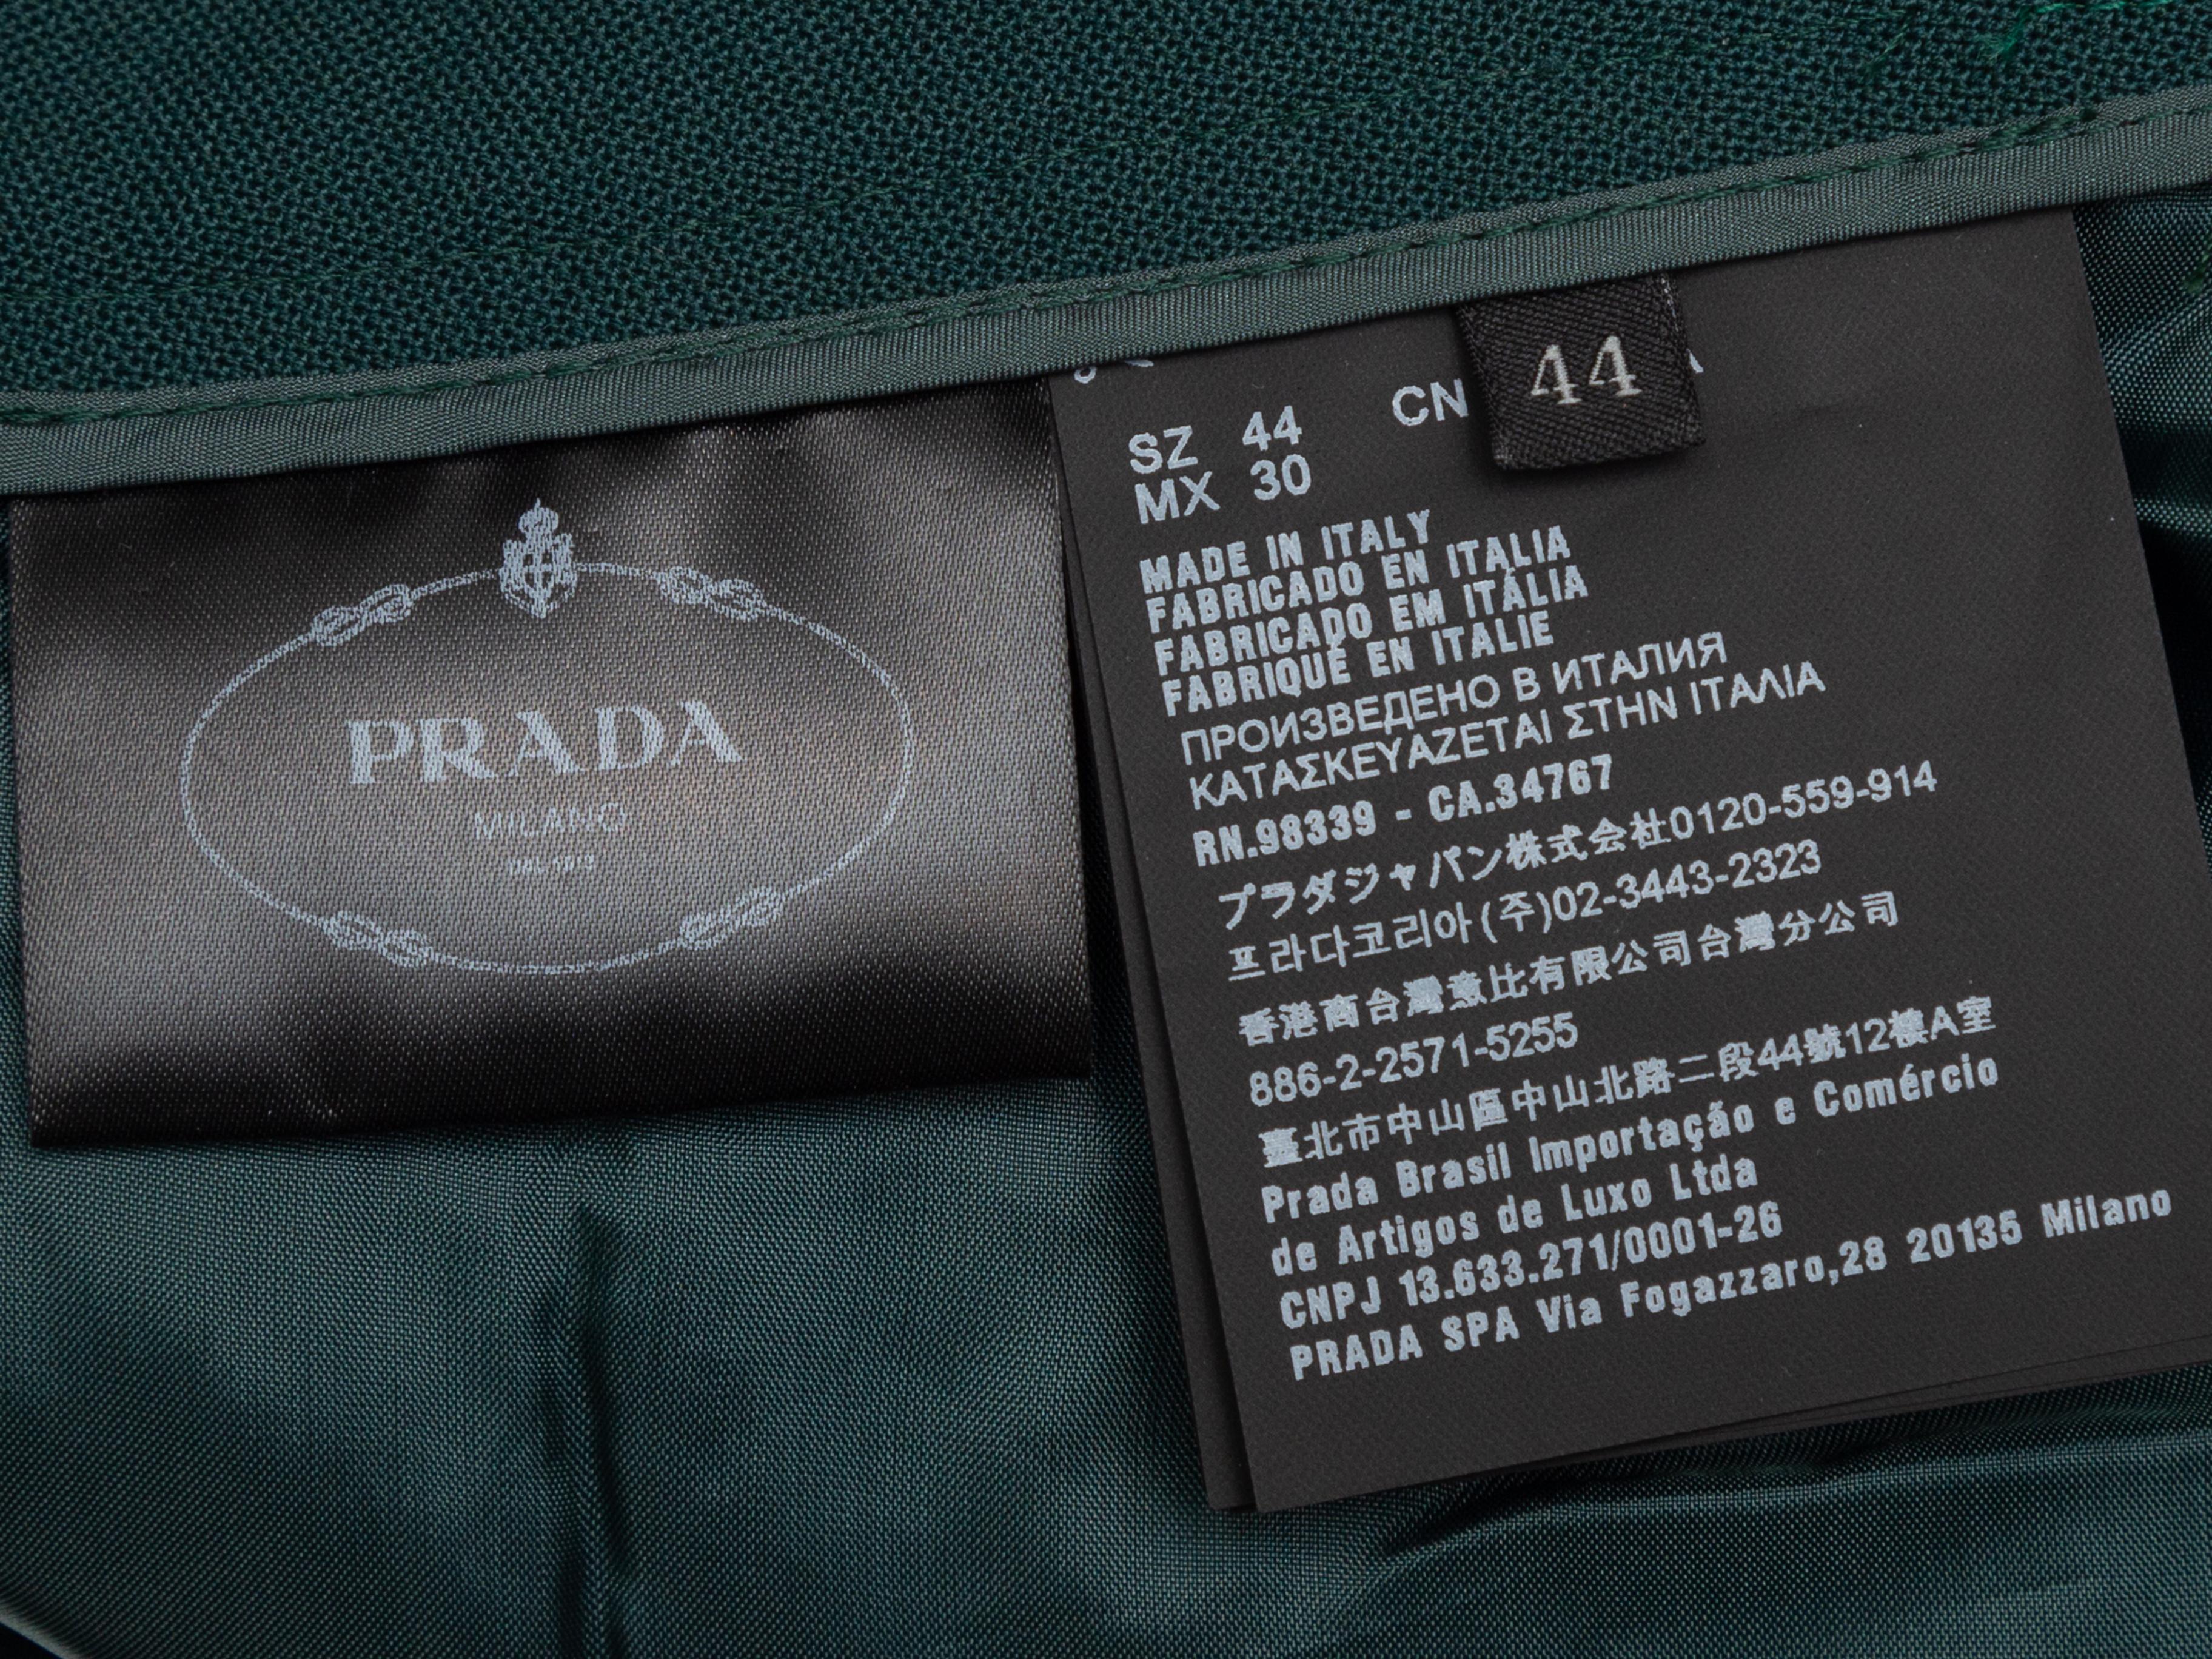 Product details: Dark green virgin wool pleated bootcut trousers by Prada. Five pockets. Zip closure at front. Designer size 44. 32